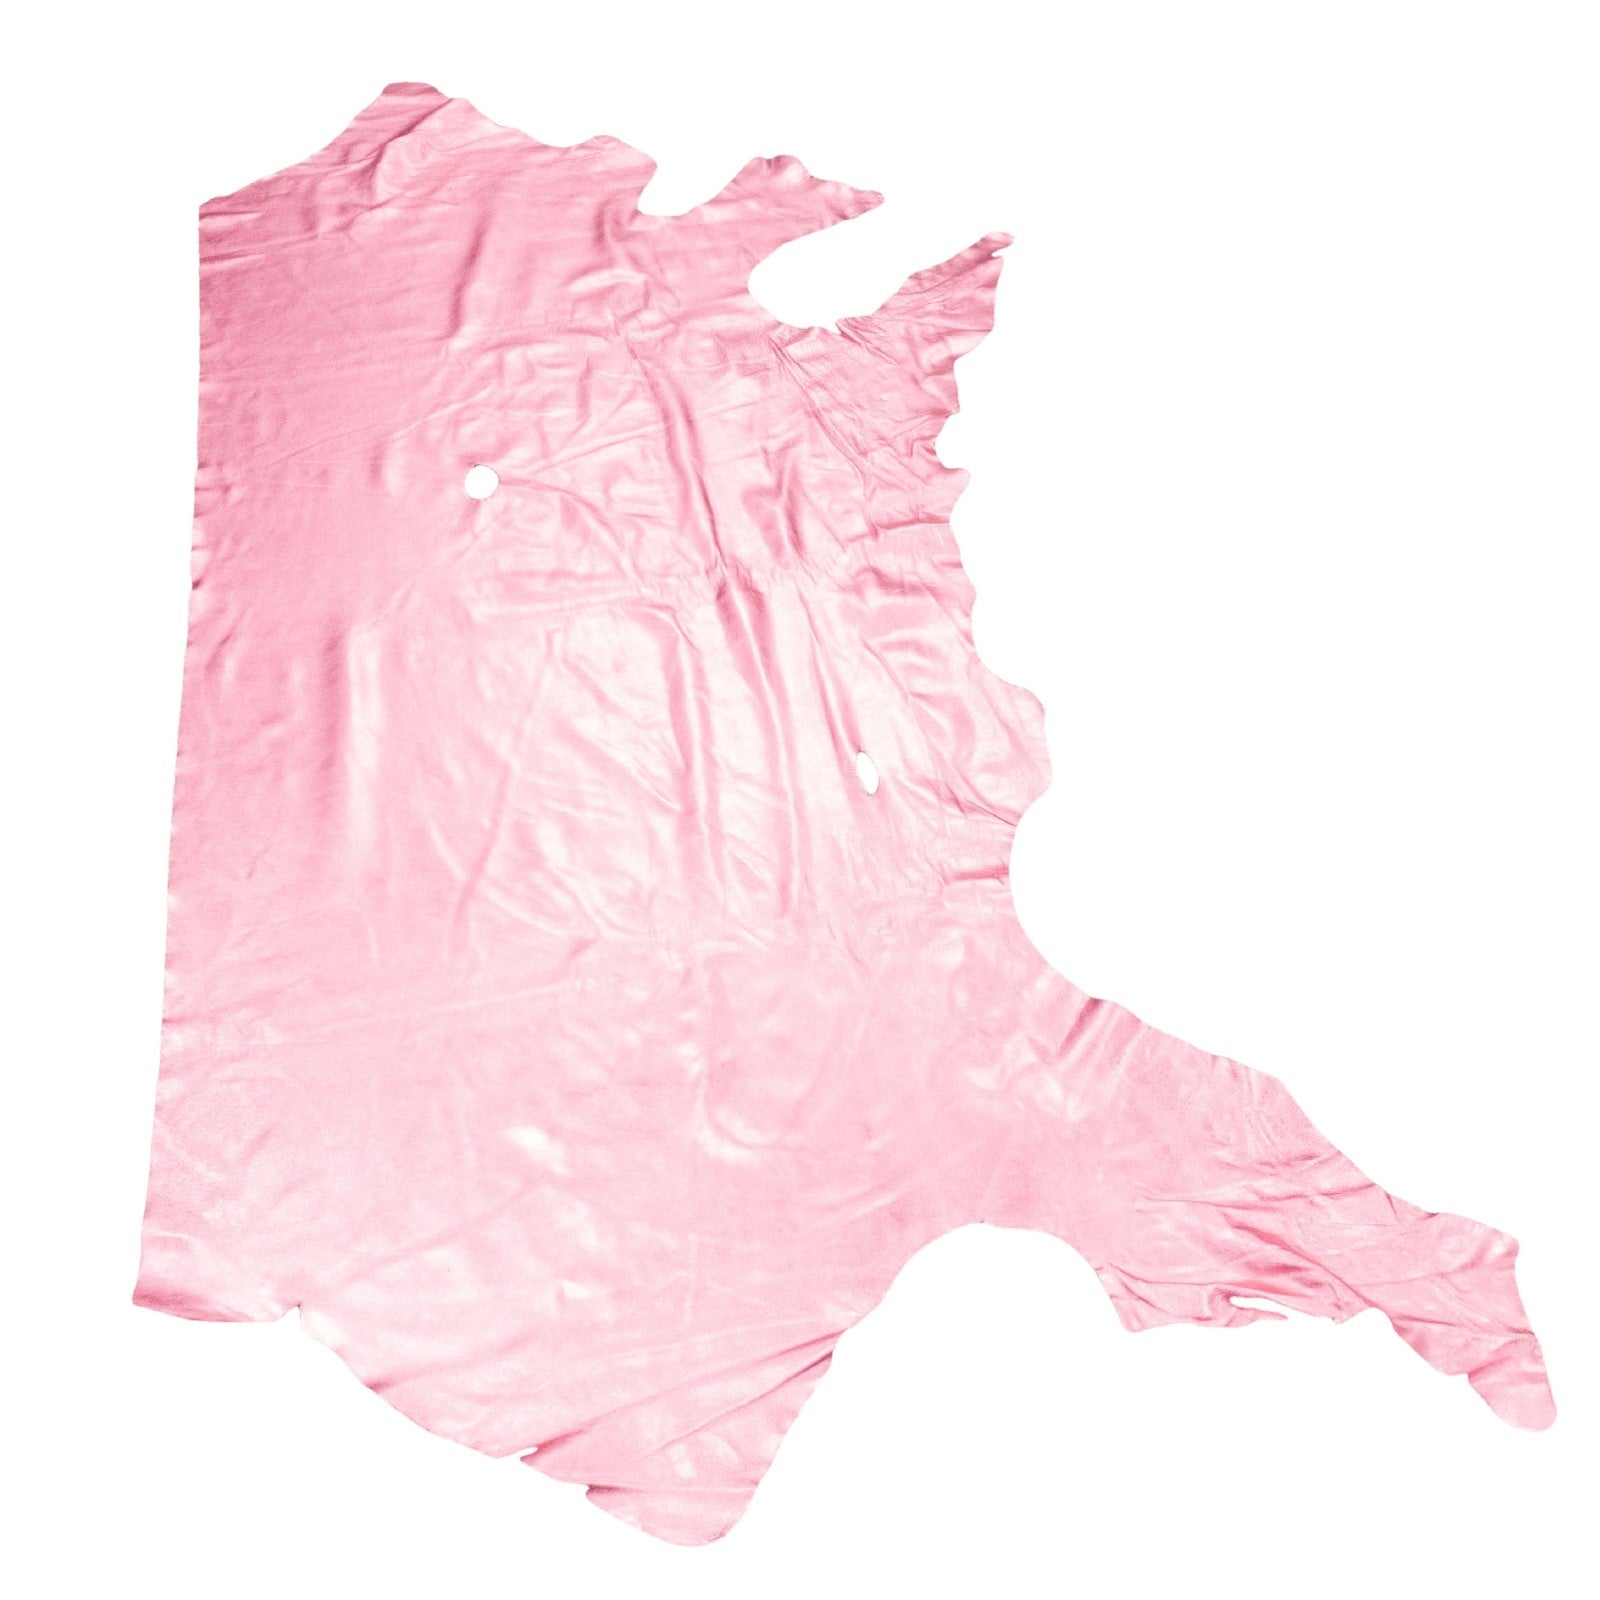 Party Girl Pink, 2-3 oz Cow Hides, Metallic Vegas, Side / 21-23 Sq Ft (Low Grade) | The Leather Guy